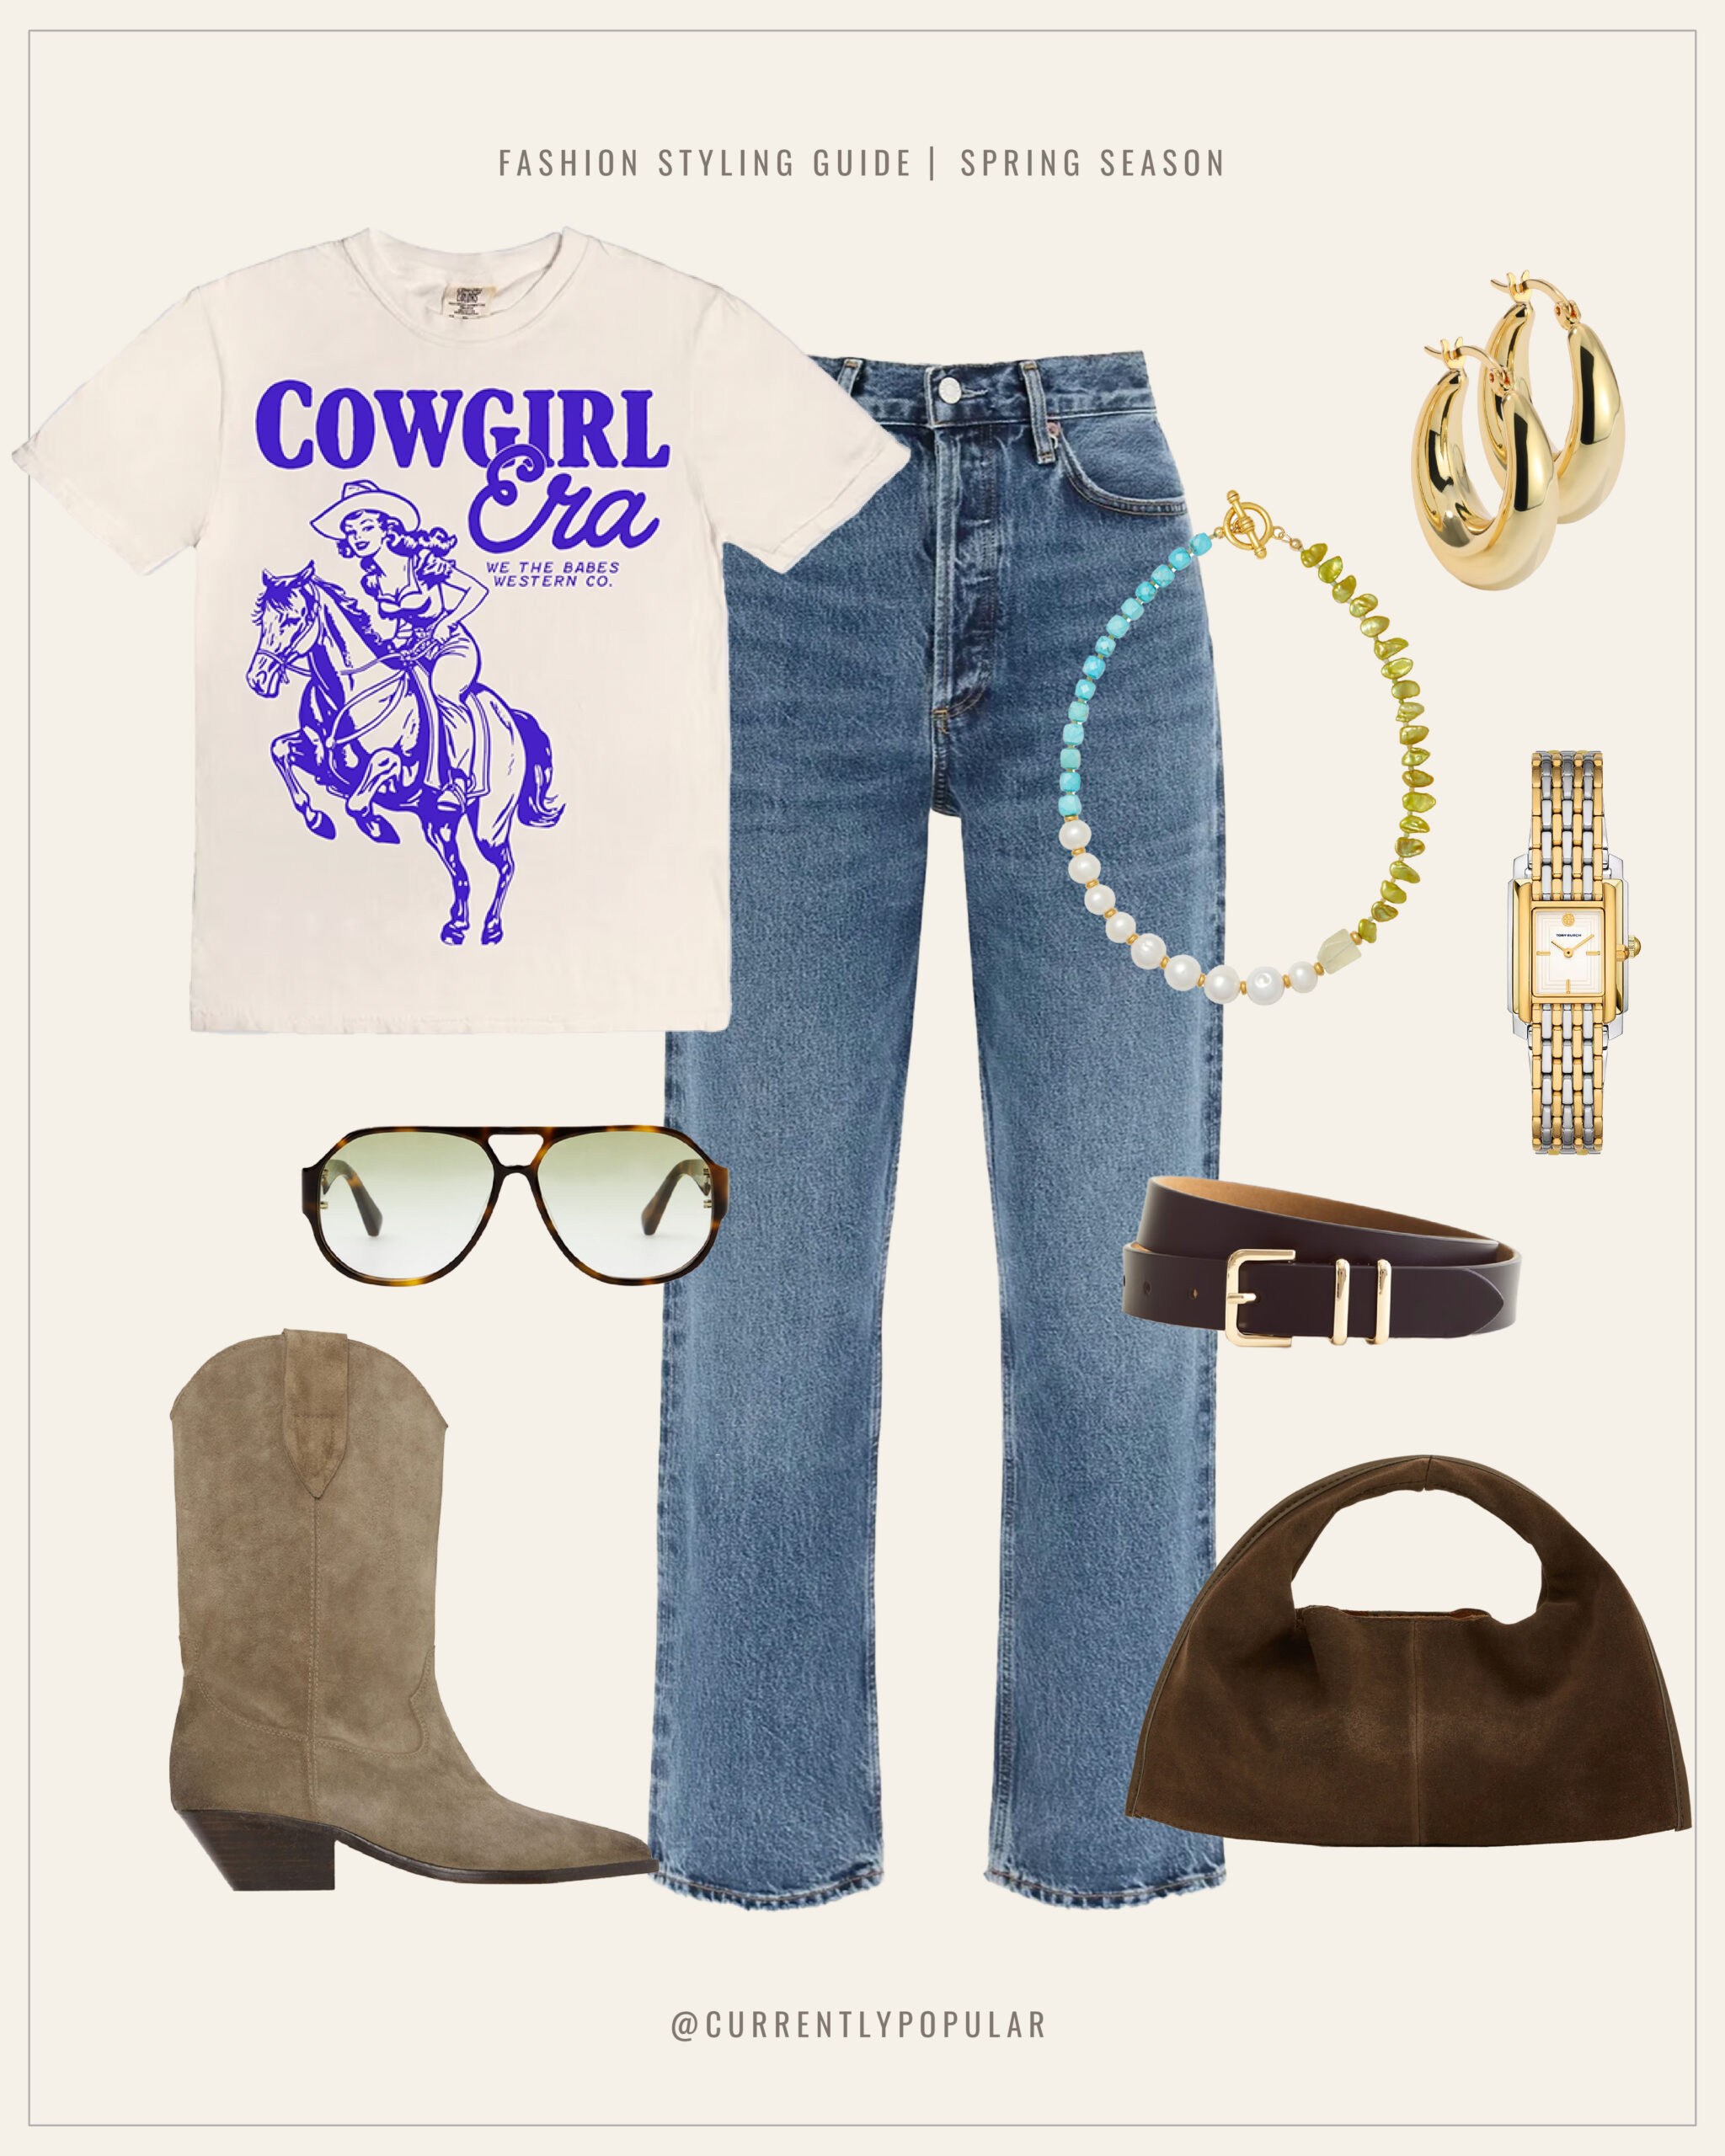 This is an image of a kitschy cowgirl outfit. It features a graphic tee that read 'Cowgirl Era', denim jeans, colorful necklace, gold hoops, gold watch, suede boots, leather belt, suede purse & a pair of oversized sunglasses